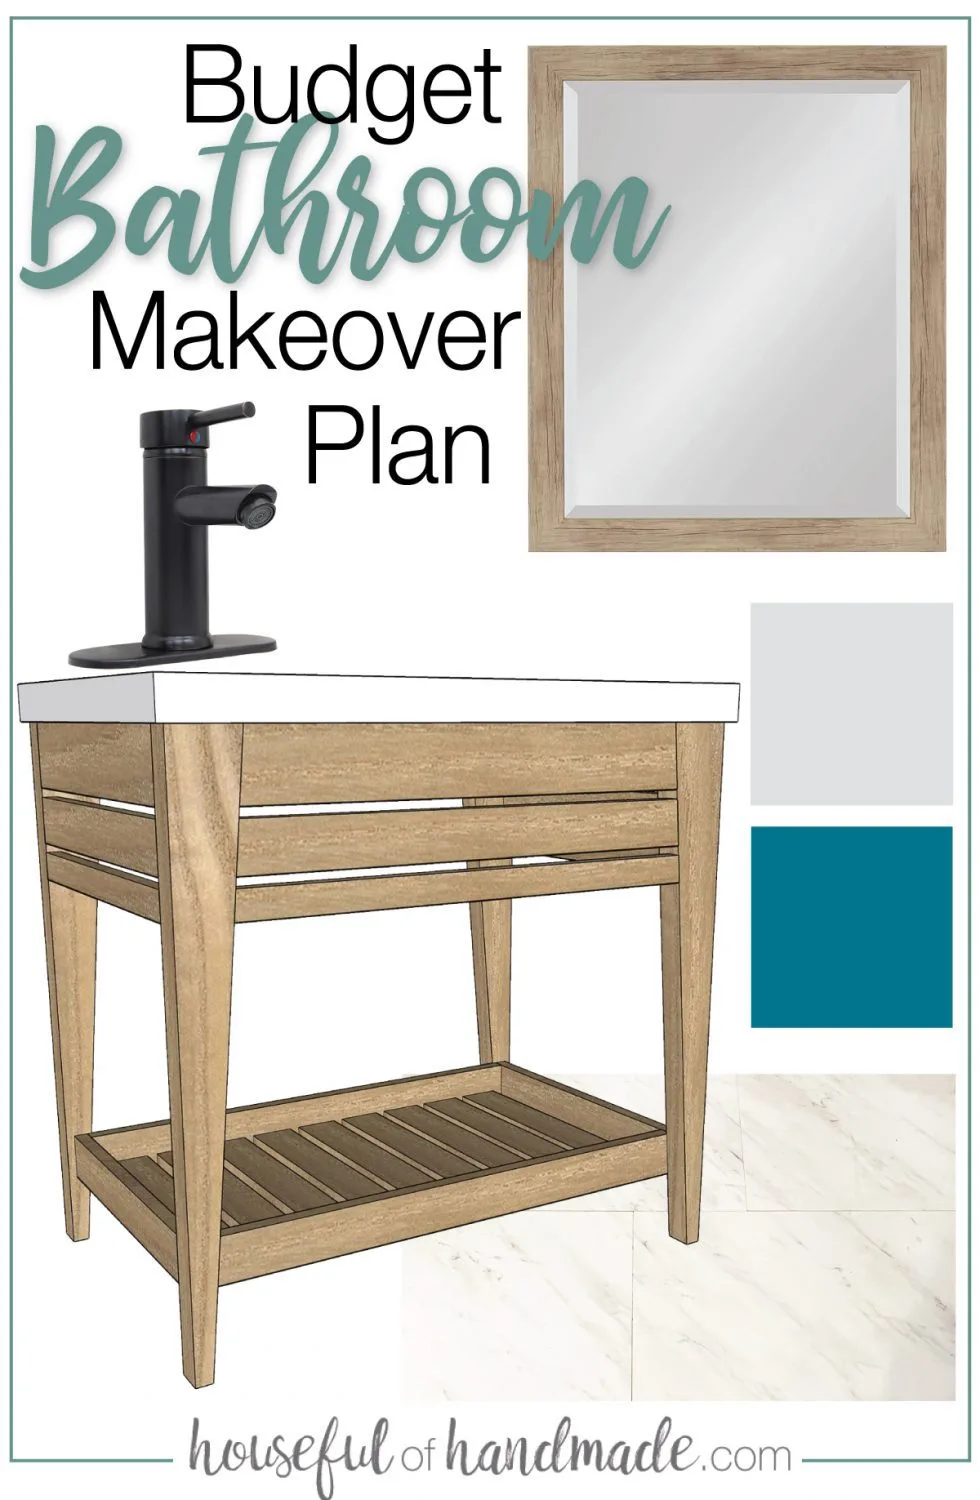 Mood board for the $100 bathroom remodel with wood framed mirror, open bathroom vanity, vinyl floor, color swatches and black faucet with text: Budget Bathroom Makeover Plan.